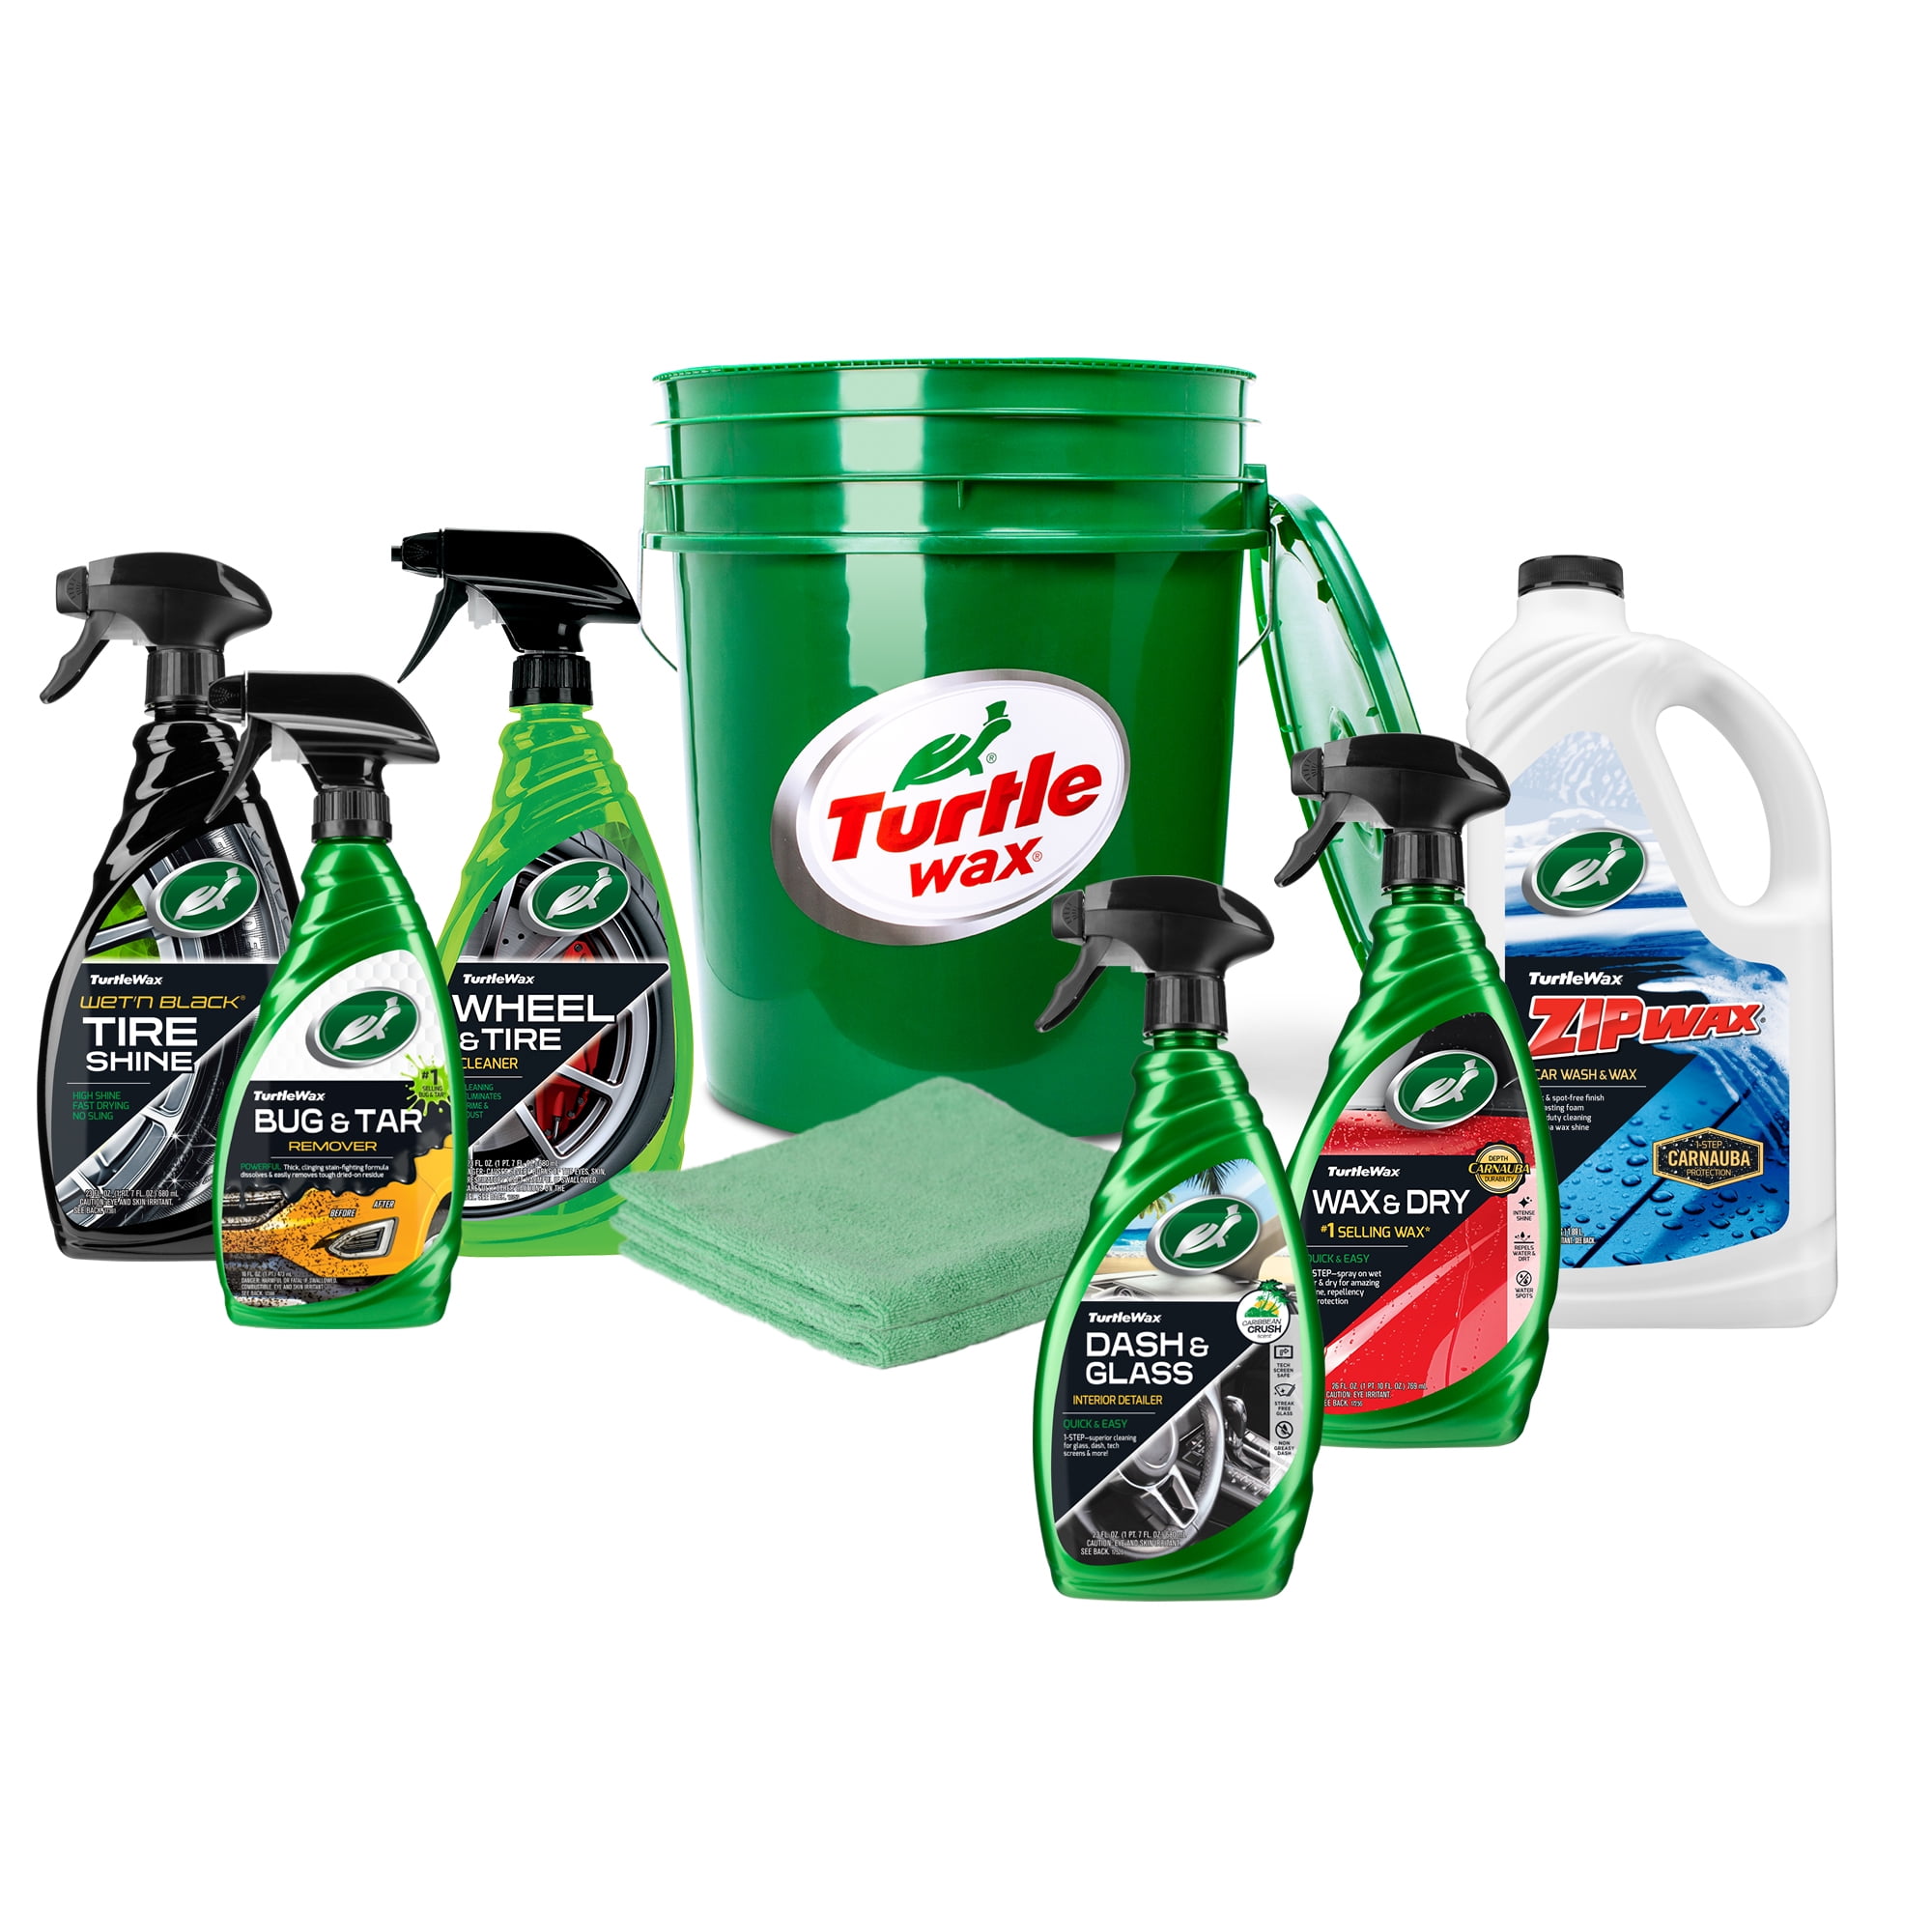 Turtle Wax 8-Piece Car Care Kit Only $22 on